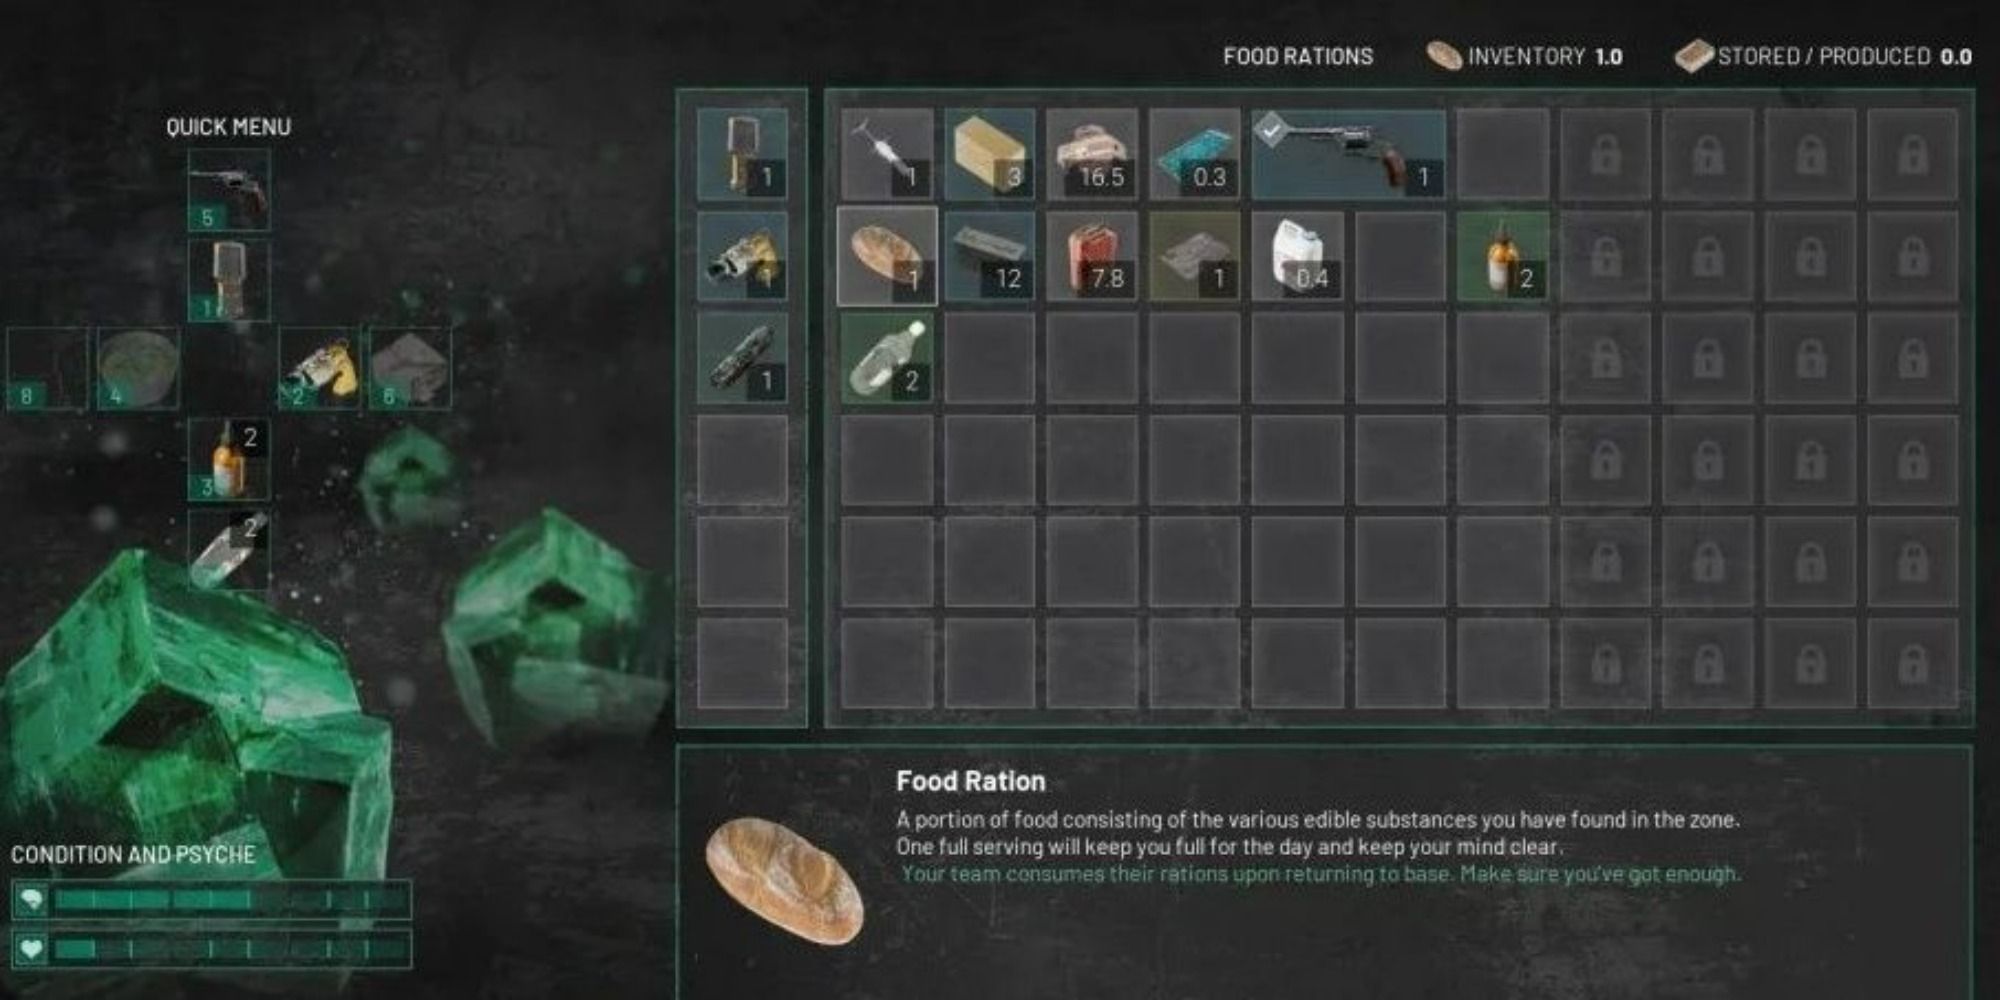 Chernobylite's inventory quick menu showing a variety of items like rations and weapons